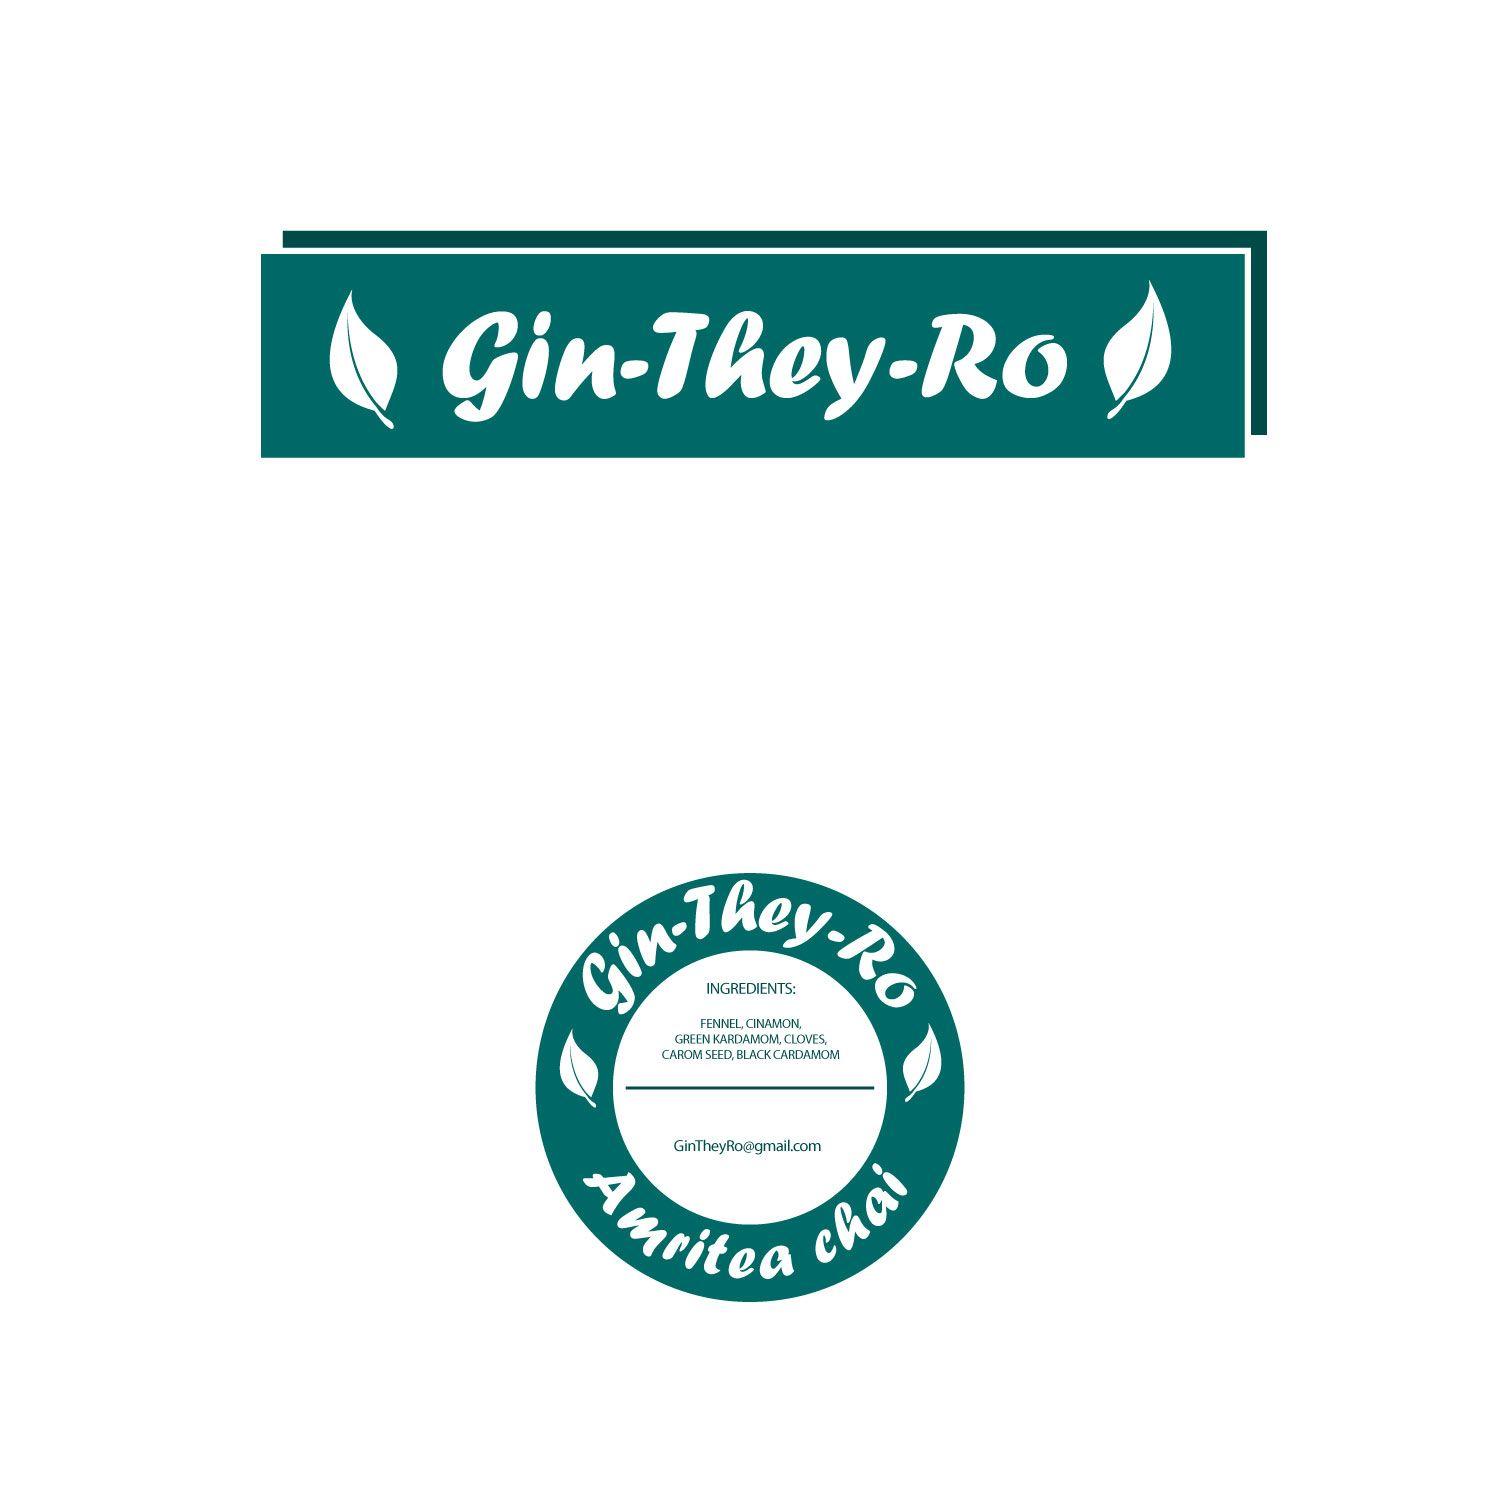 Ro Logo - It Company Logo Design For Gin They Ro By Sinthetix. Design